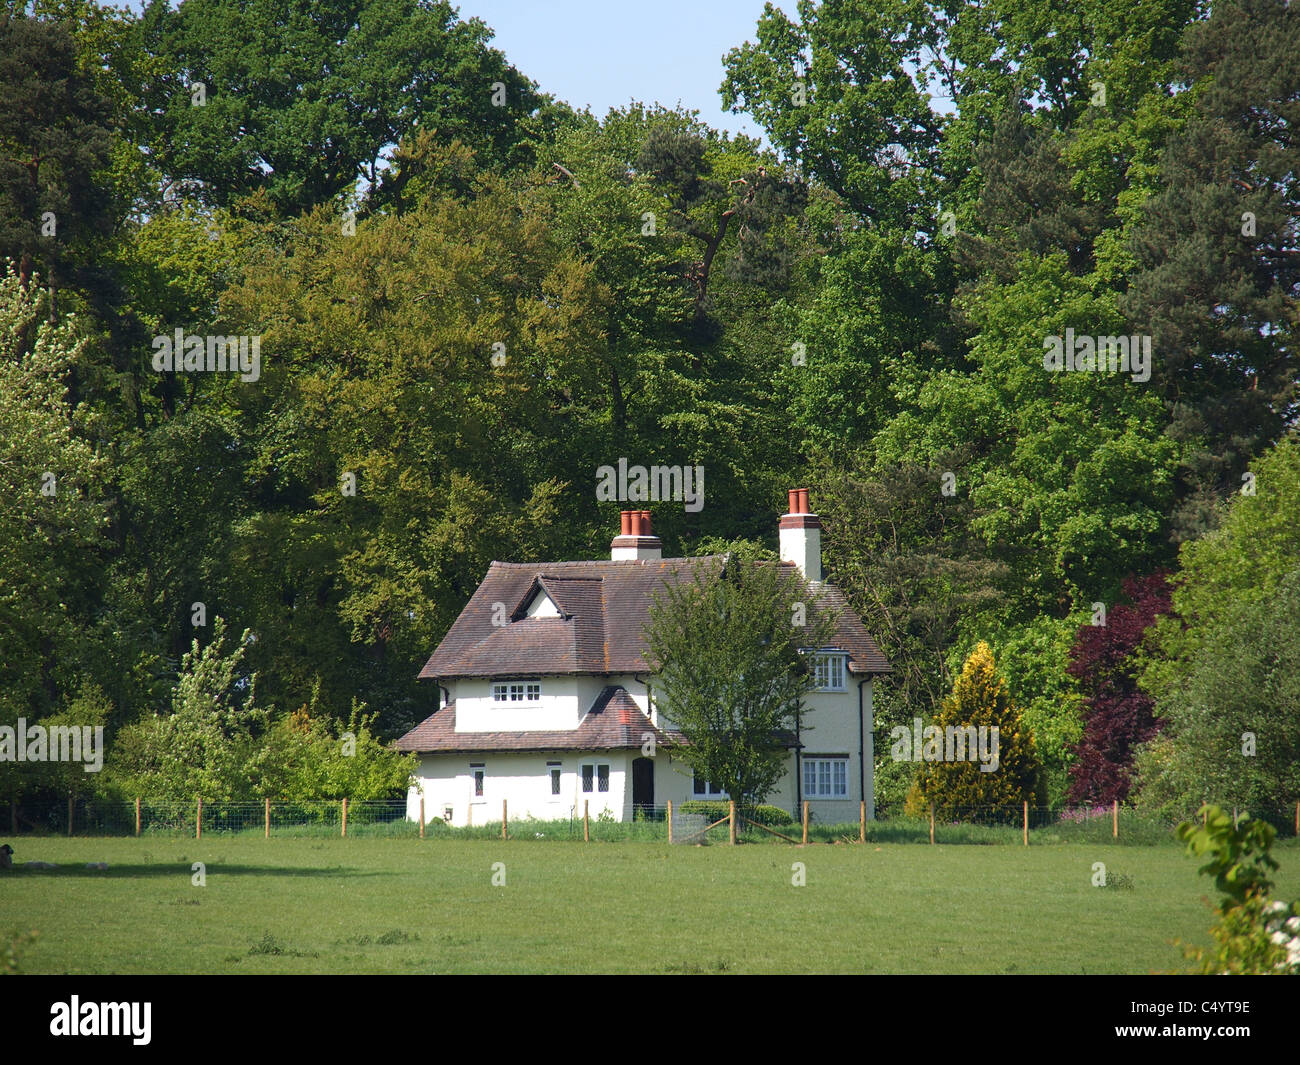 detached house exterior view Stock Photo